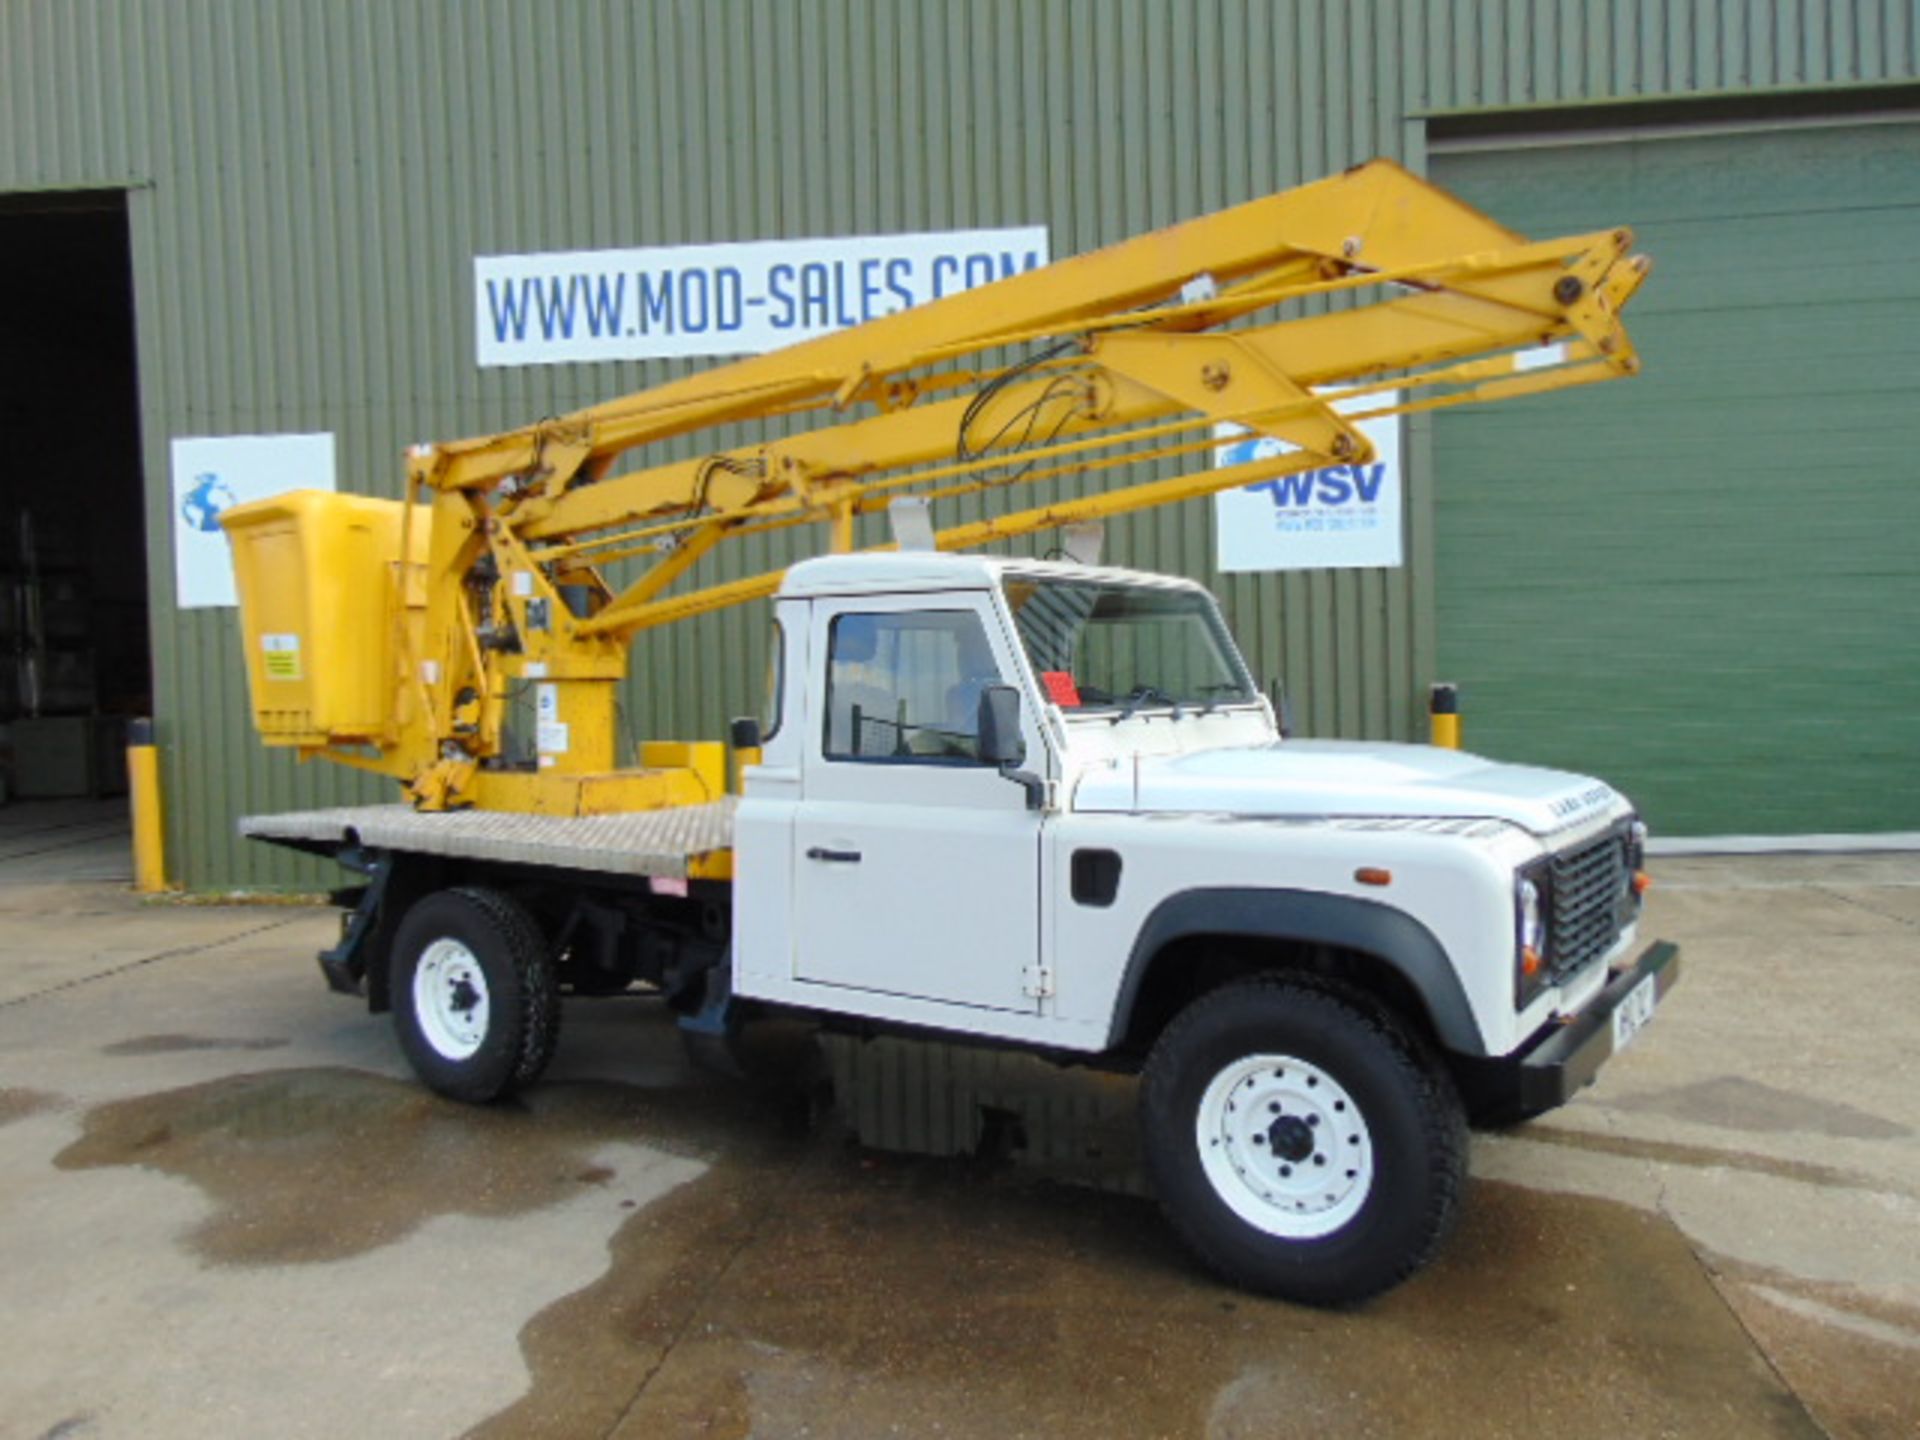 2010 Land Rover Defender 130 2.4 Puma Cherry Picker / Access Lift ONLY 83,760 MILES! - Image 3 of 32